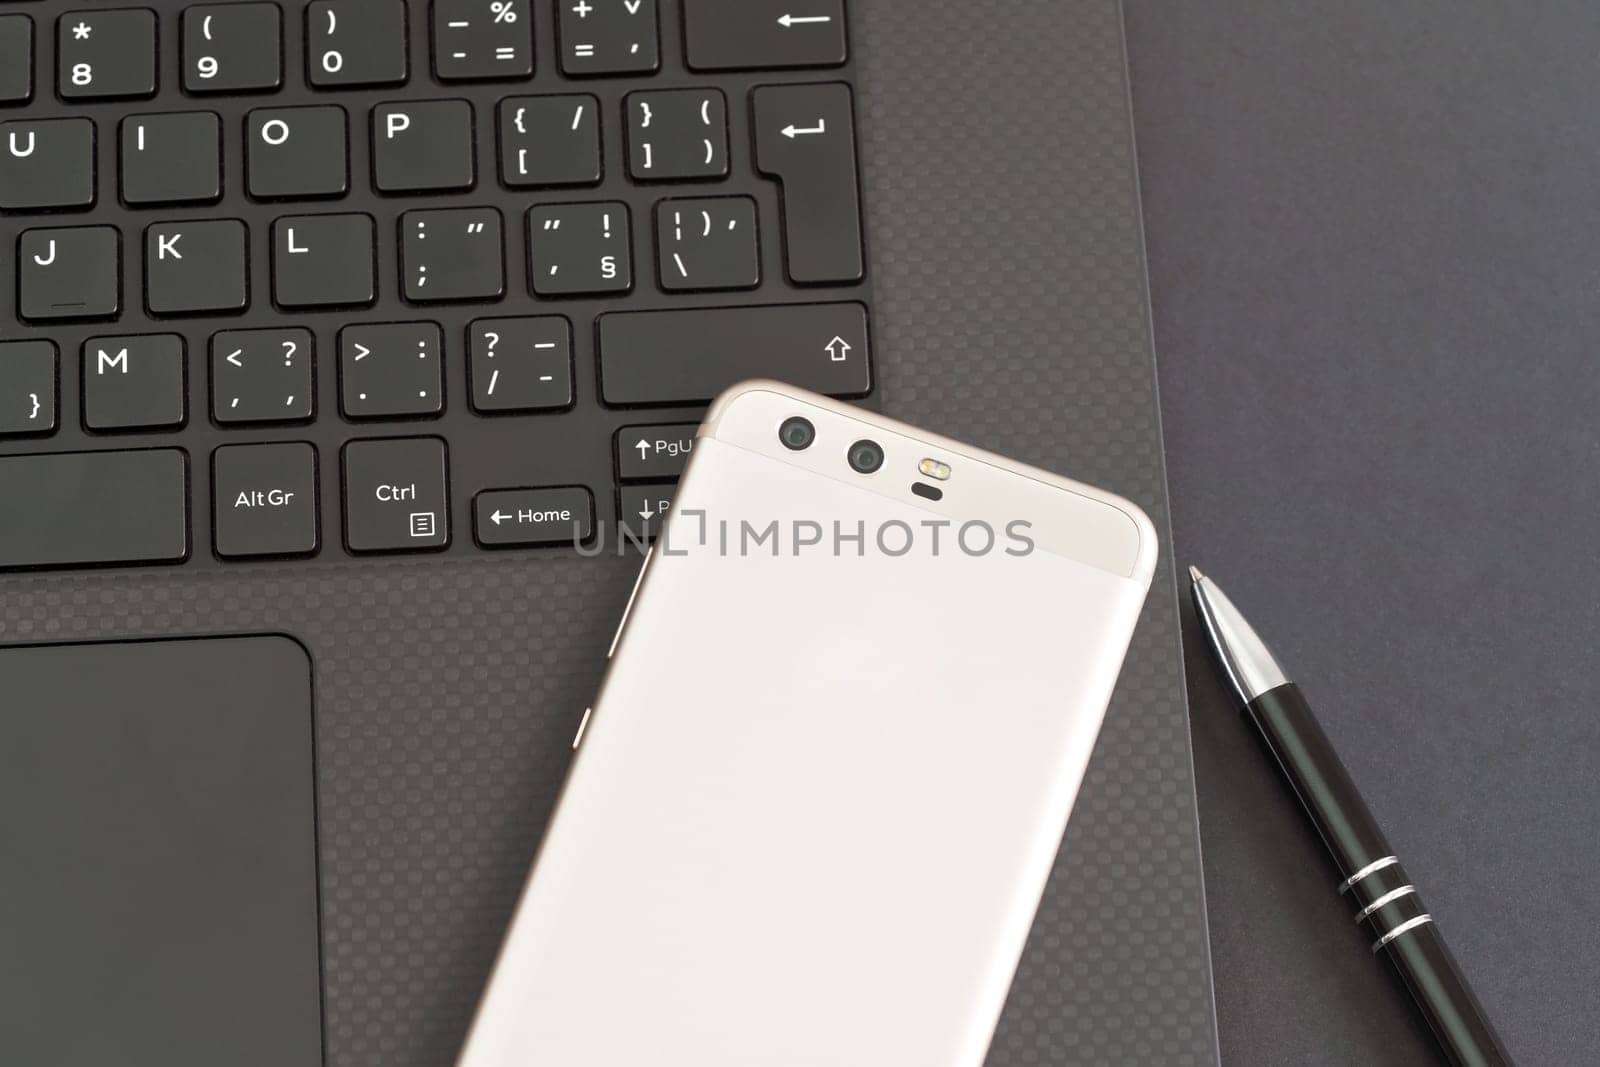 Black laptop keyboard, mobile phone and pen on gray table - view from above by Ivanko